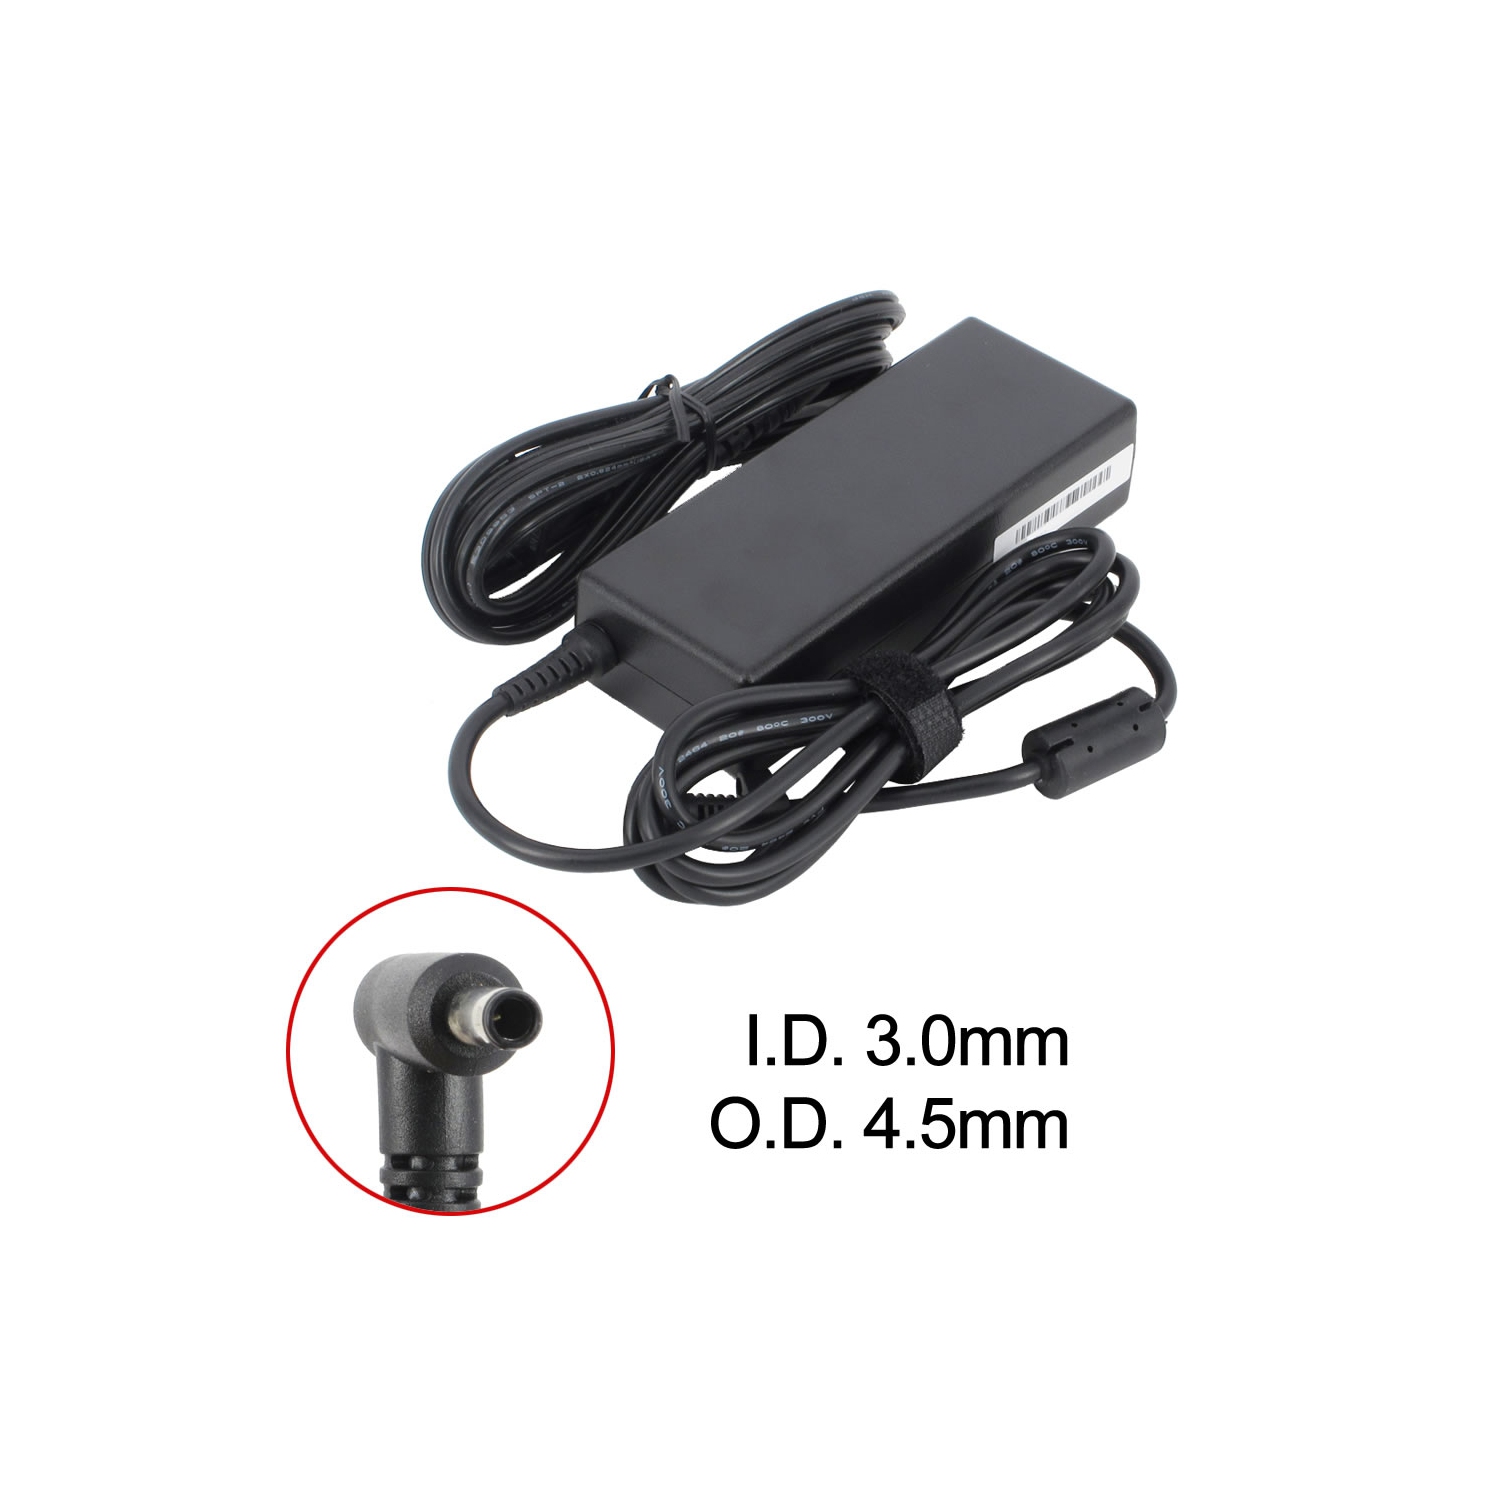 New Replacement Laptop AC Adapter for HP Pavilion 17t-f000, 709986-002, 710412-001, 741727-001, PA-1650-32HE